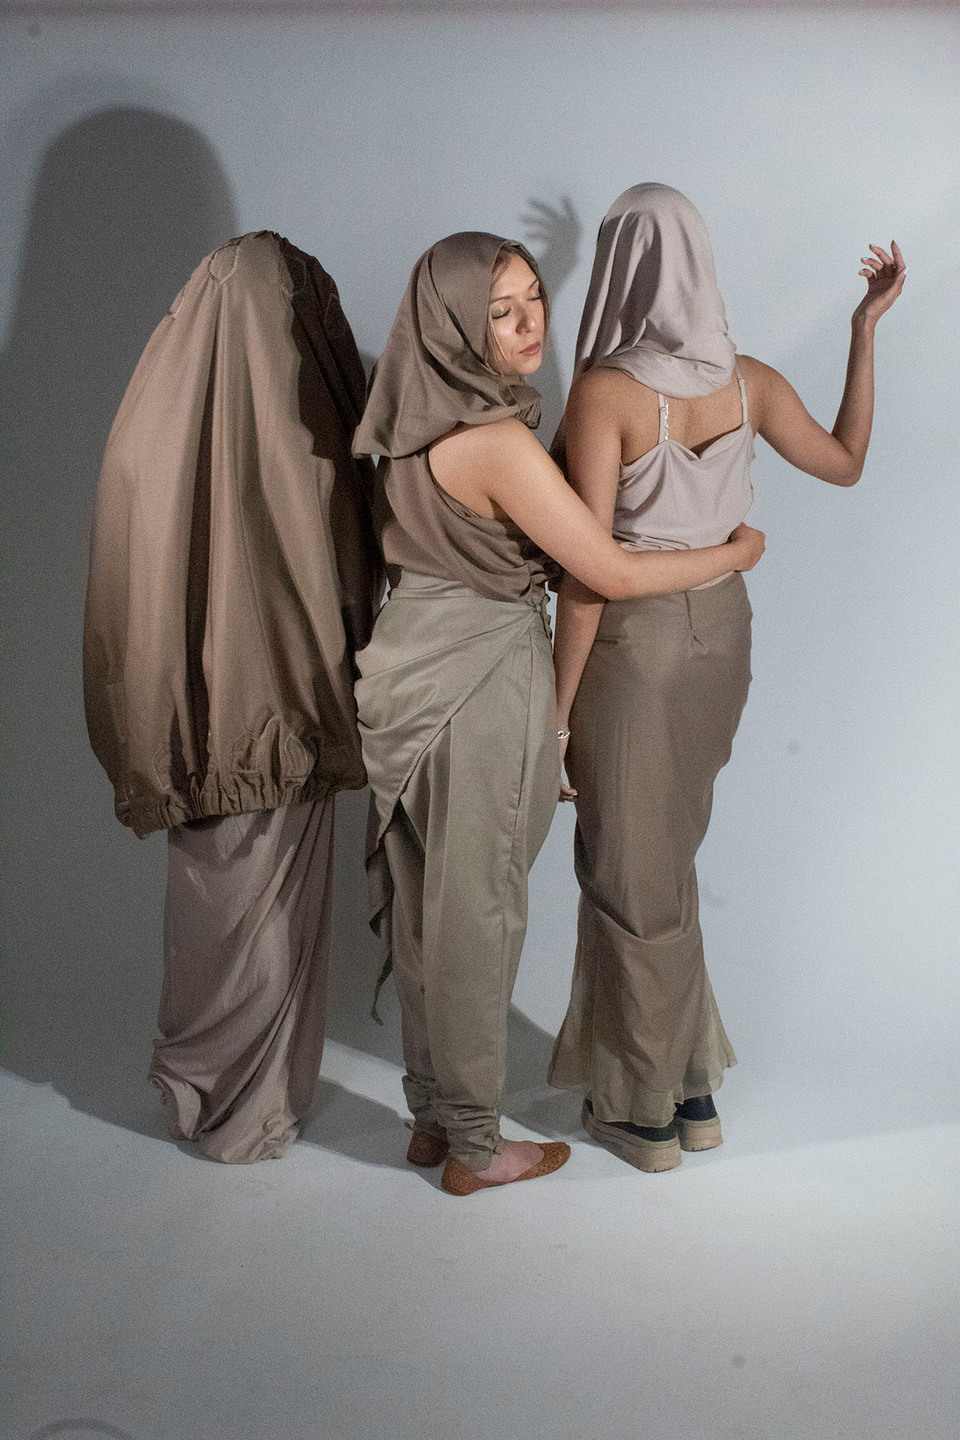 Rear view of three women modelling dresses, trousers and headscarves inspired by traditional Yemeni clothing with a futurist twist